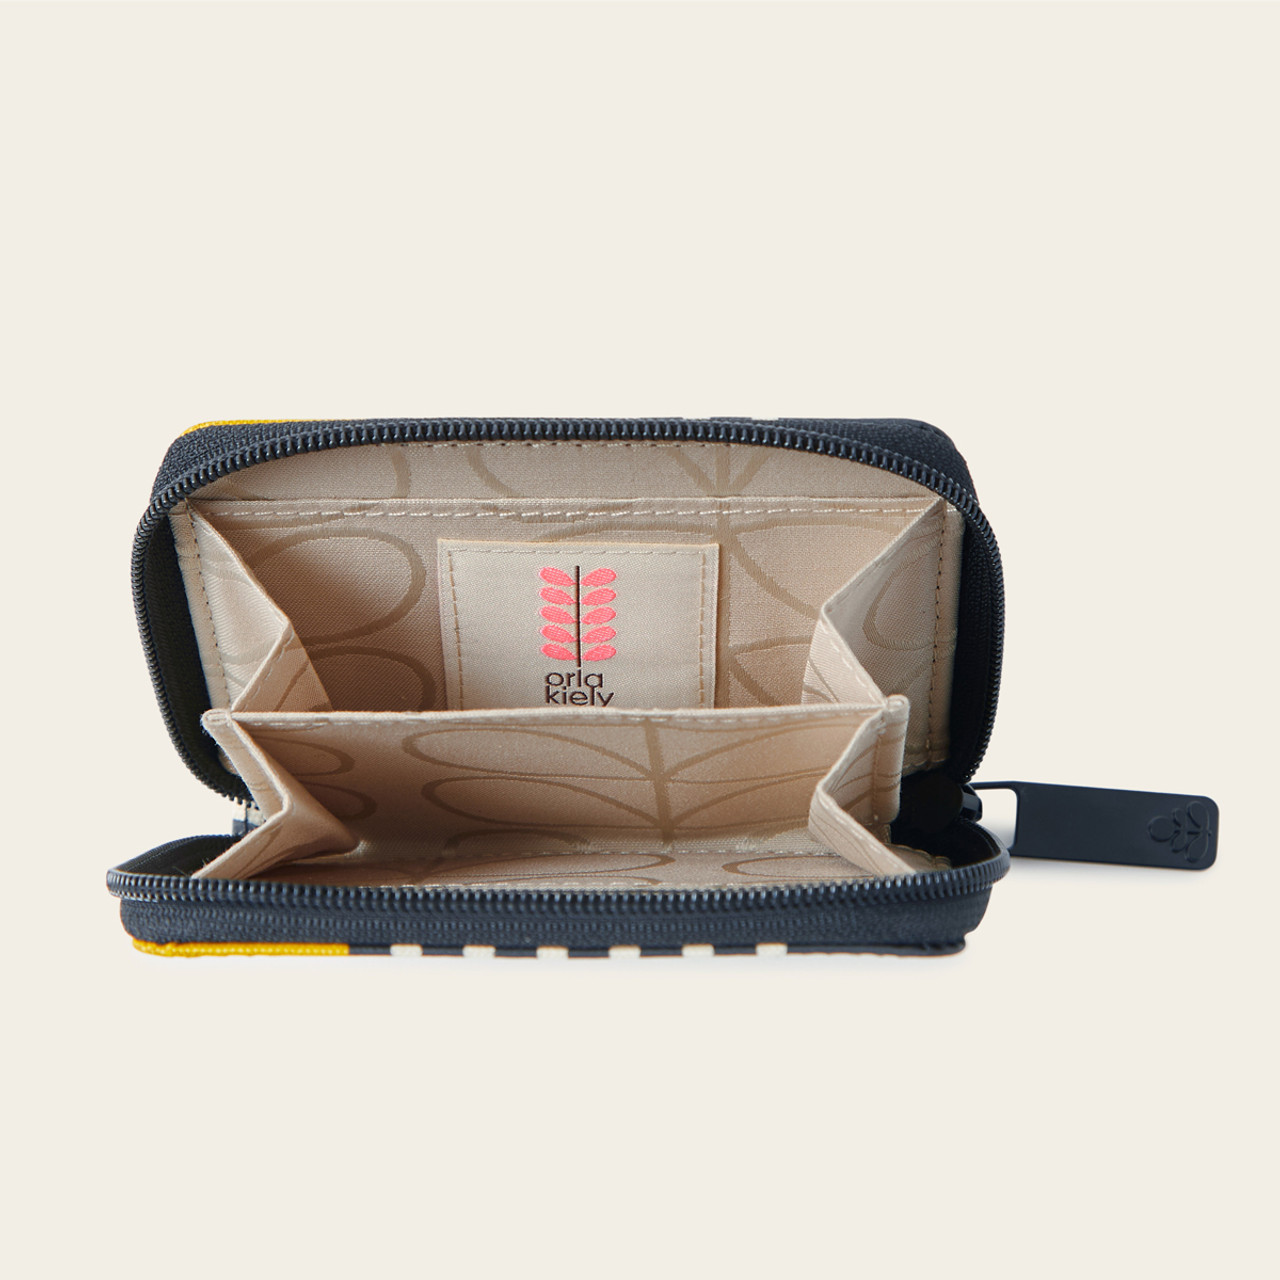 Orla Kiely Multi Stem Big Zip Wallet, Multi, One Size : Amazon.in: Bags,  Wallets and Luggage